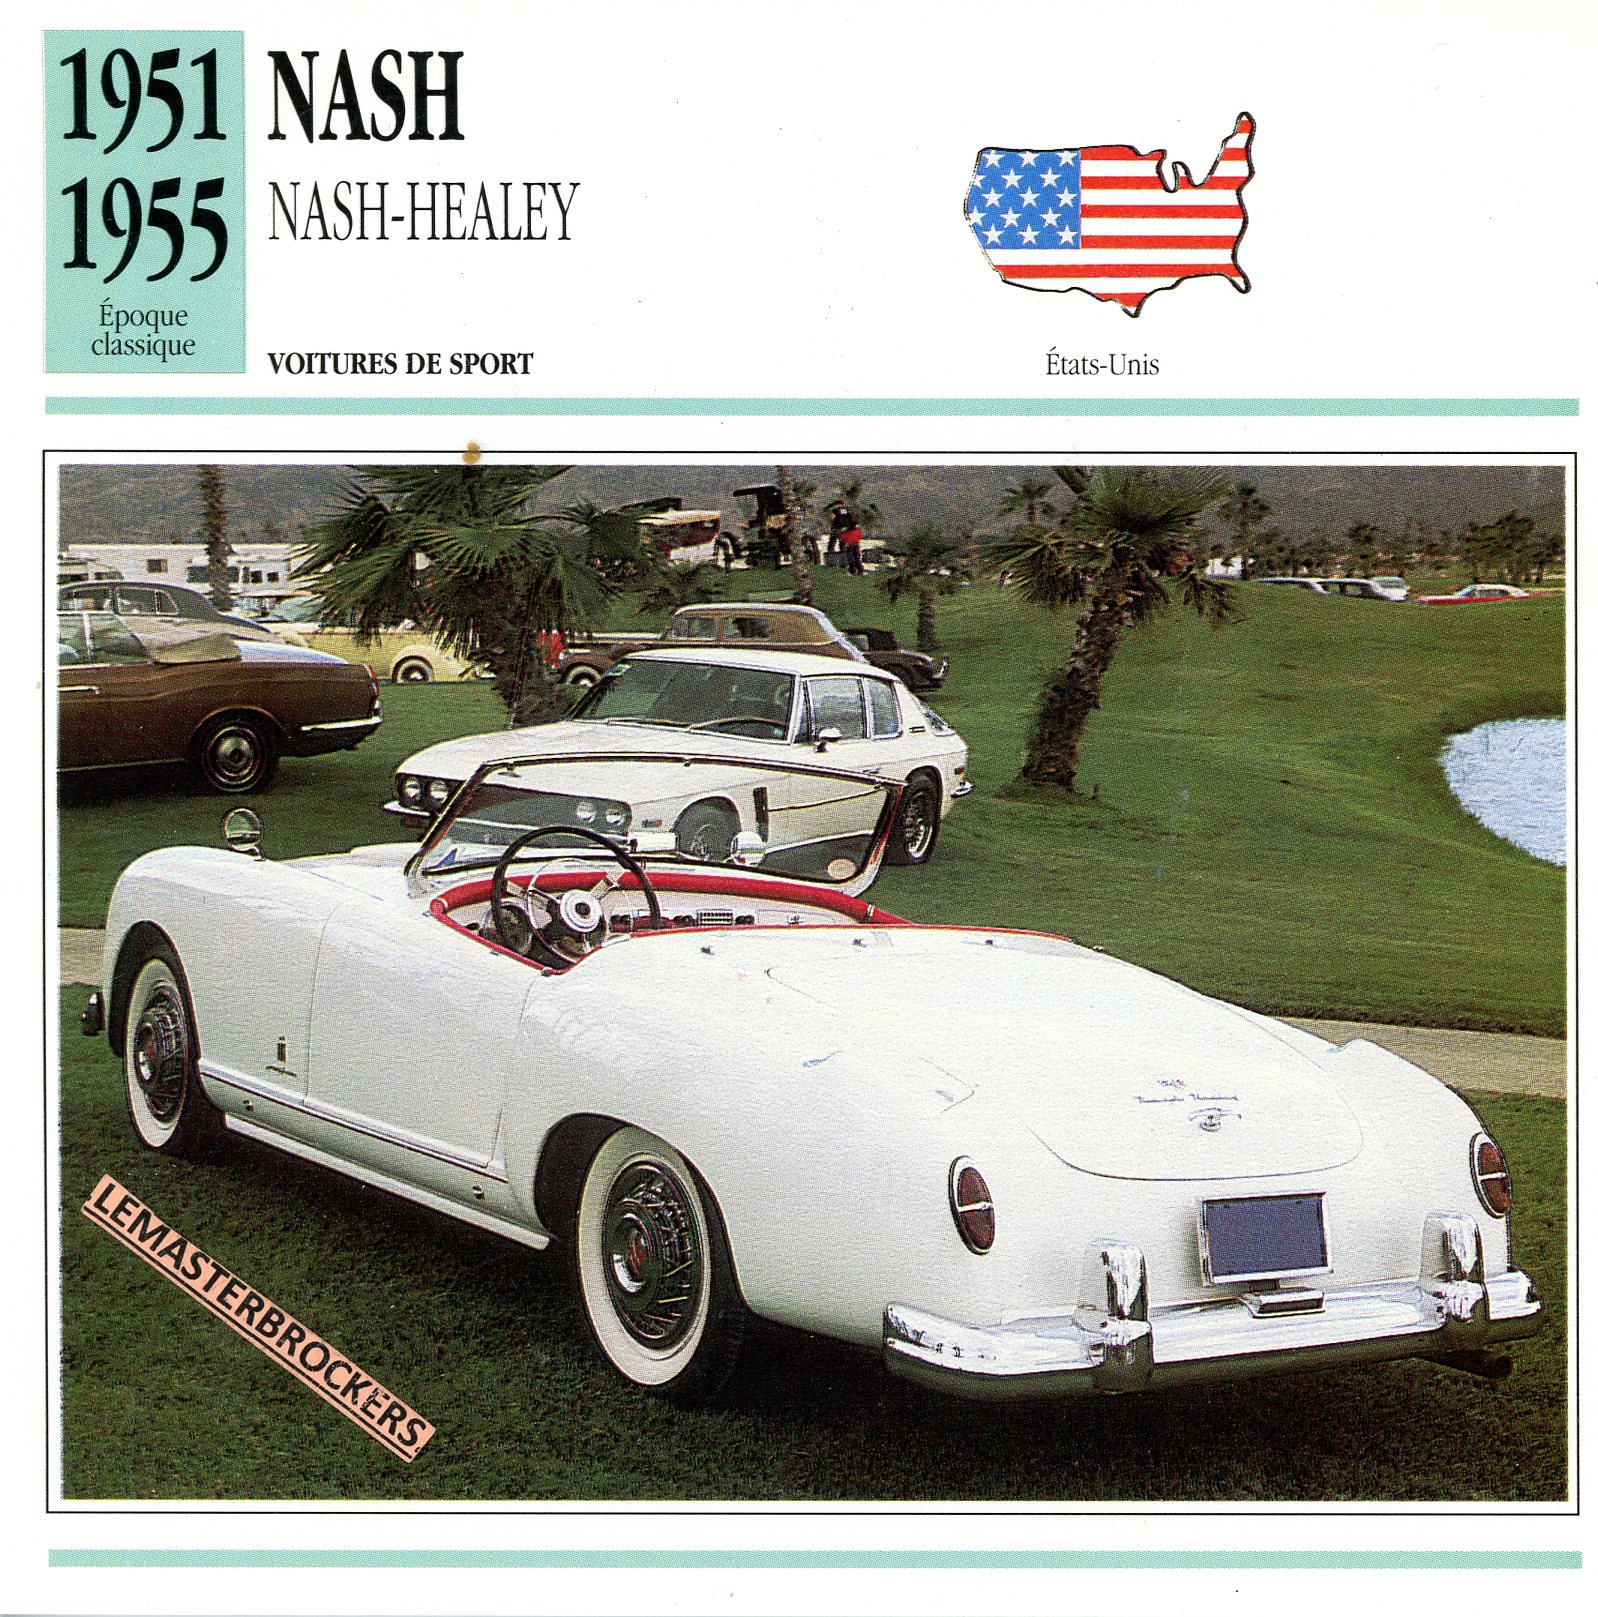 NASH-HEALEY-1951-1955-LEMASTERBROCKERS-CARS-CARD-FICHE-AUTO